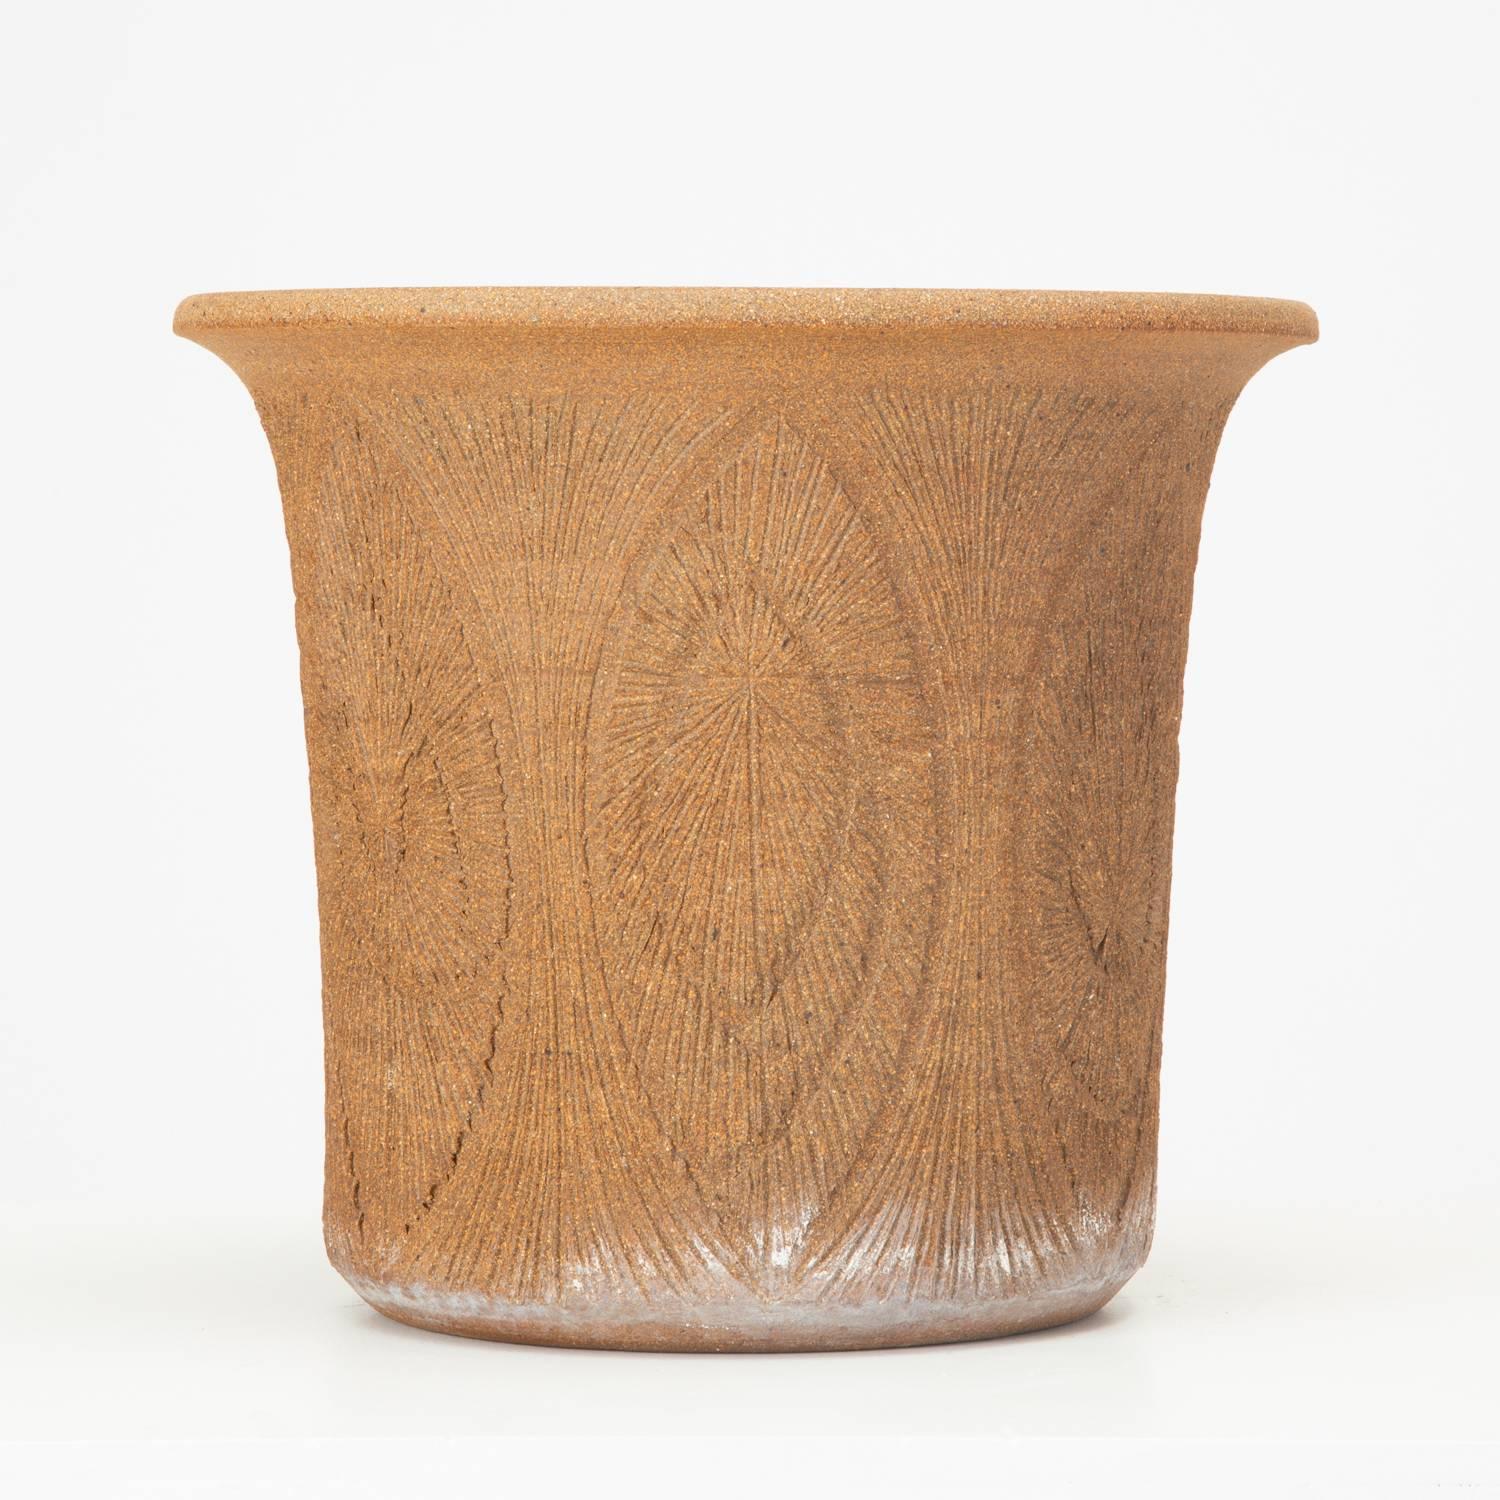 A 1970s handmade studio pottery planter by California ceramics artist Robert Maxwell. This example has a tulip shape that flares at the lip. It is decorated with Maxwell's signature incised designs, a marquise motif suggesting peacock feathers. The